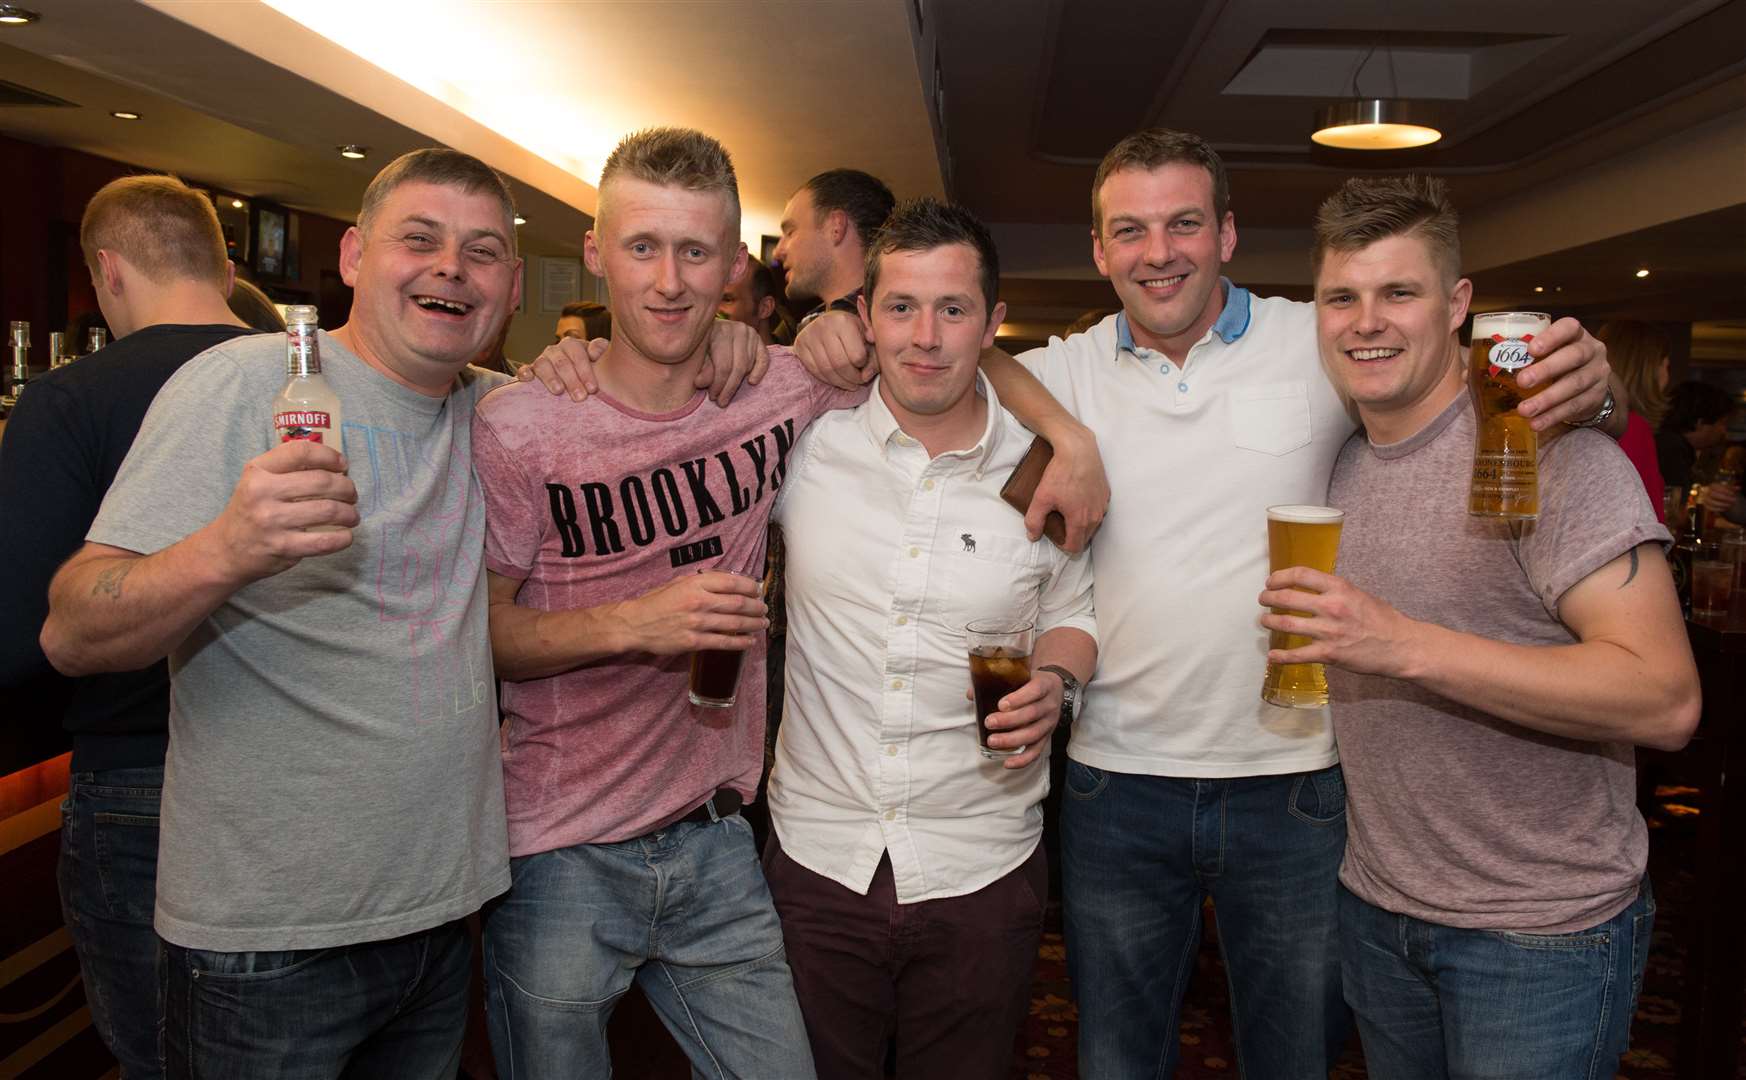 Lads night out in Wetherspoons for (left to right) Stephen Hyndman, Steven Foulton, Mark Ervine, Sean Fanmall and Johnny O'Neil